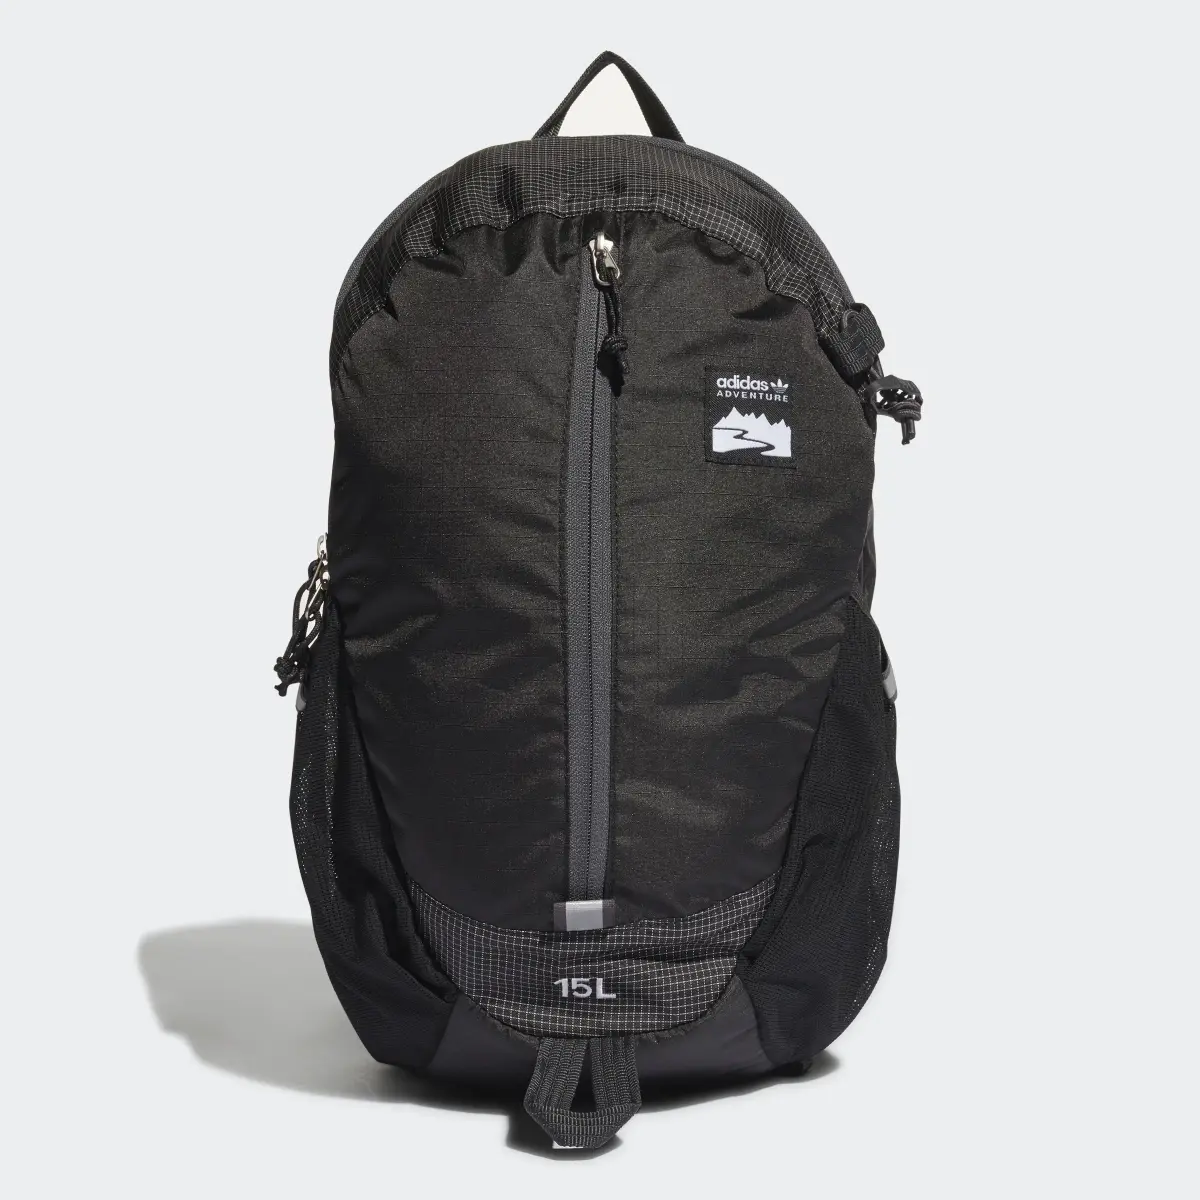 Adidas Adventure Backpack Small. 2